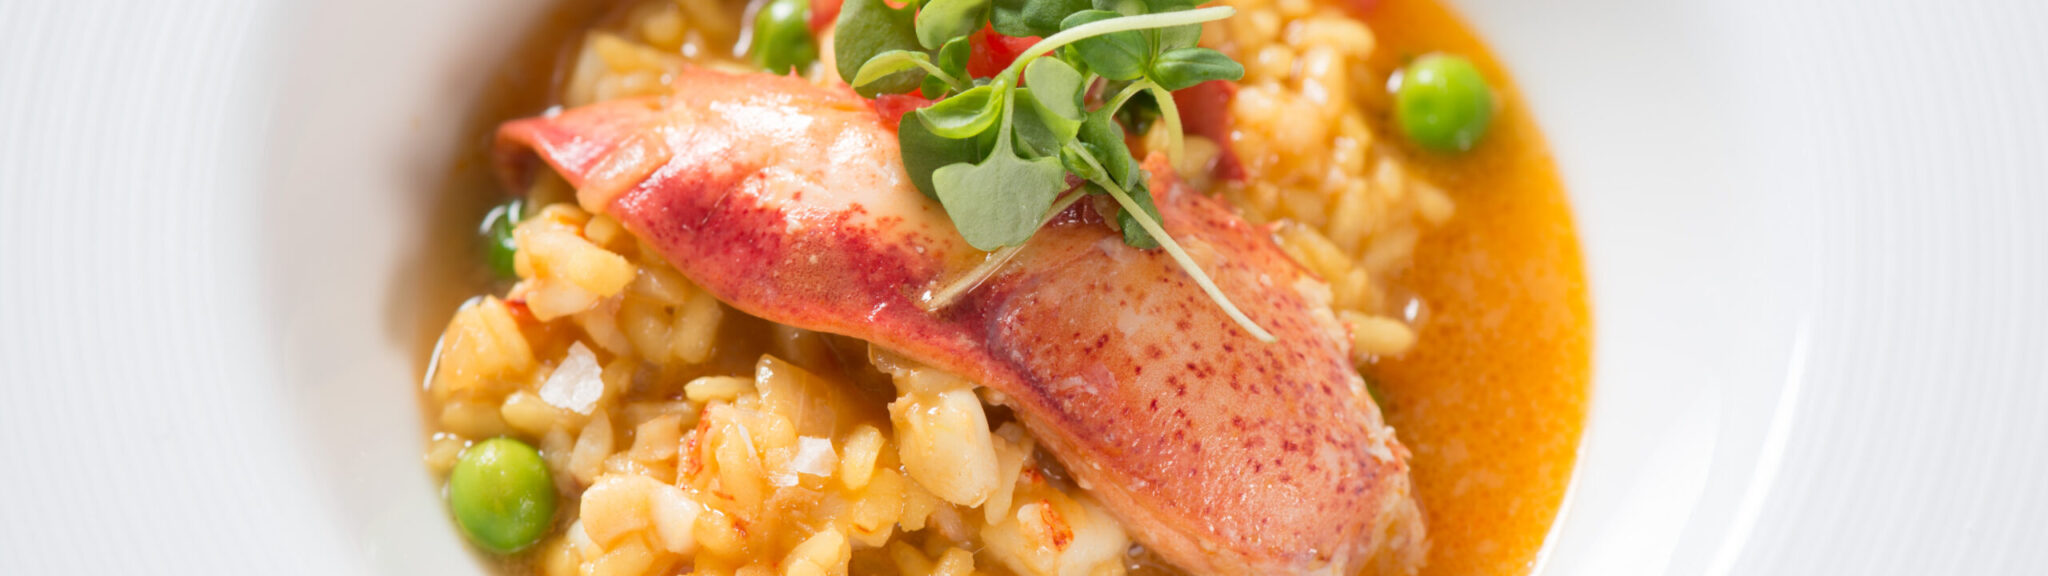 Maine Lobster Risotto with English Peas and Tomato Concasse recipe image